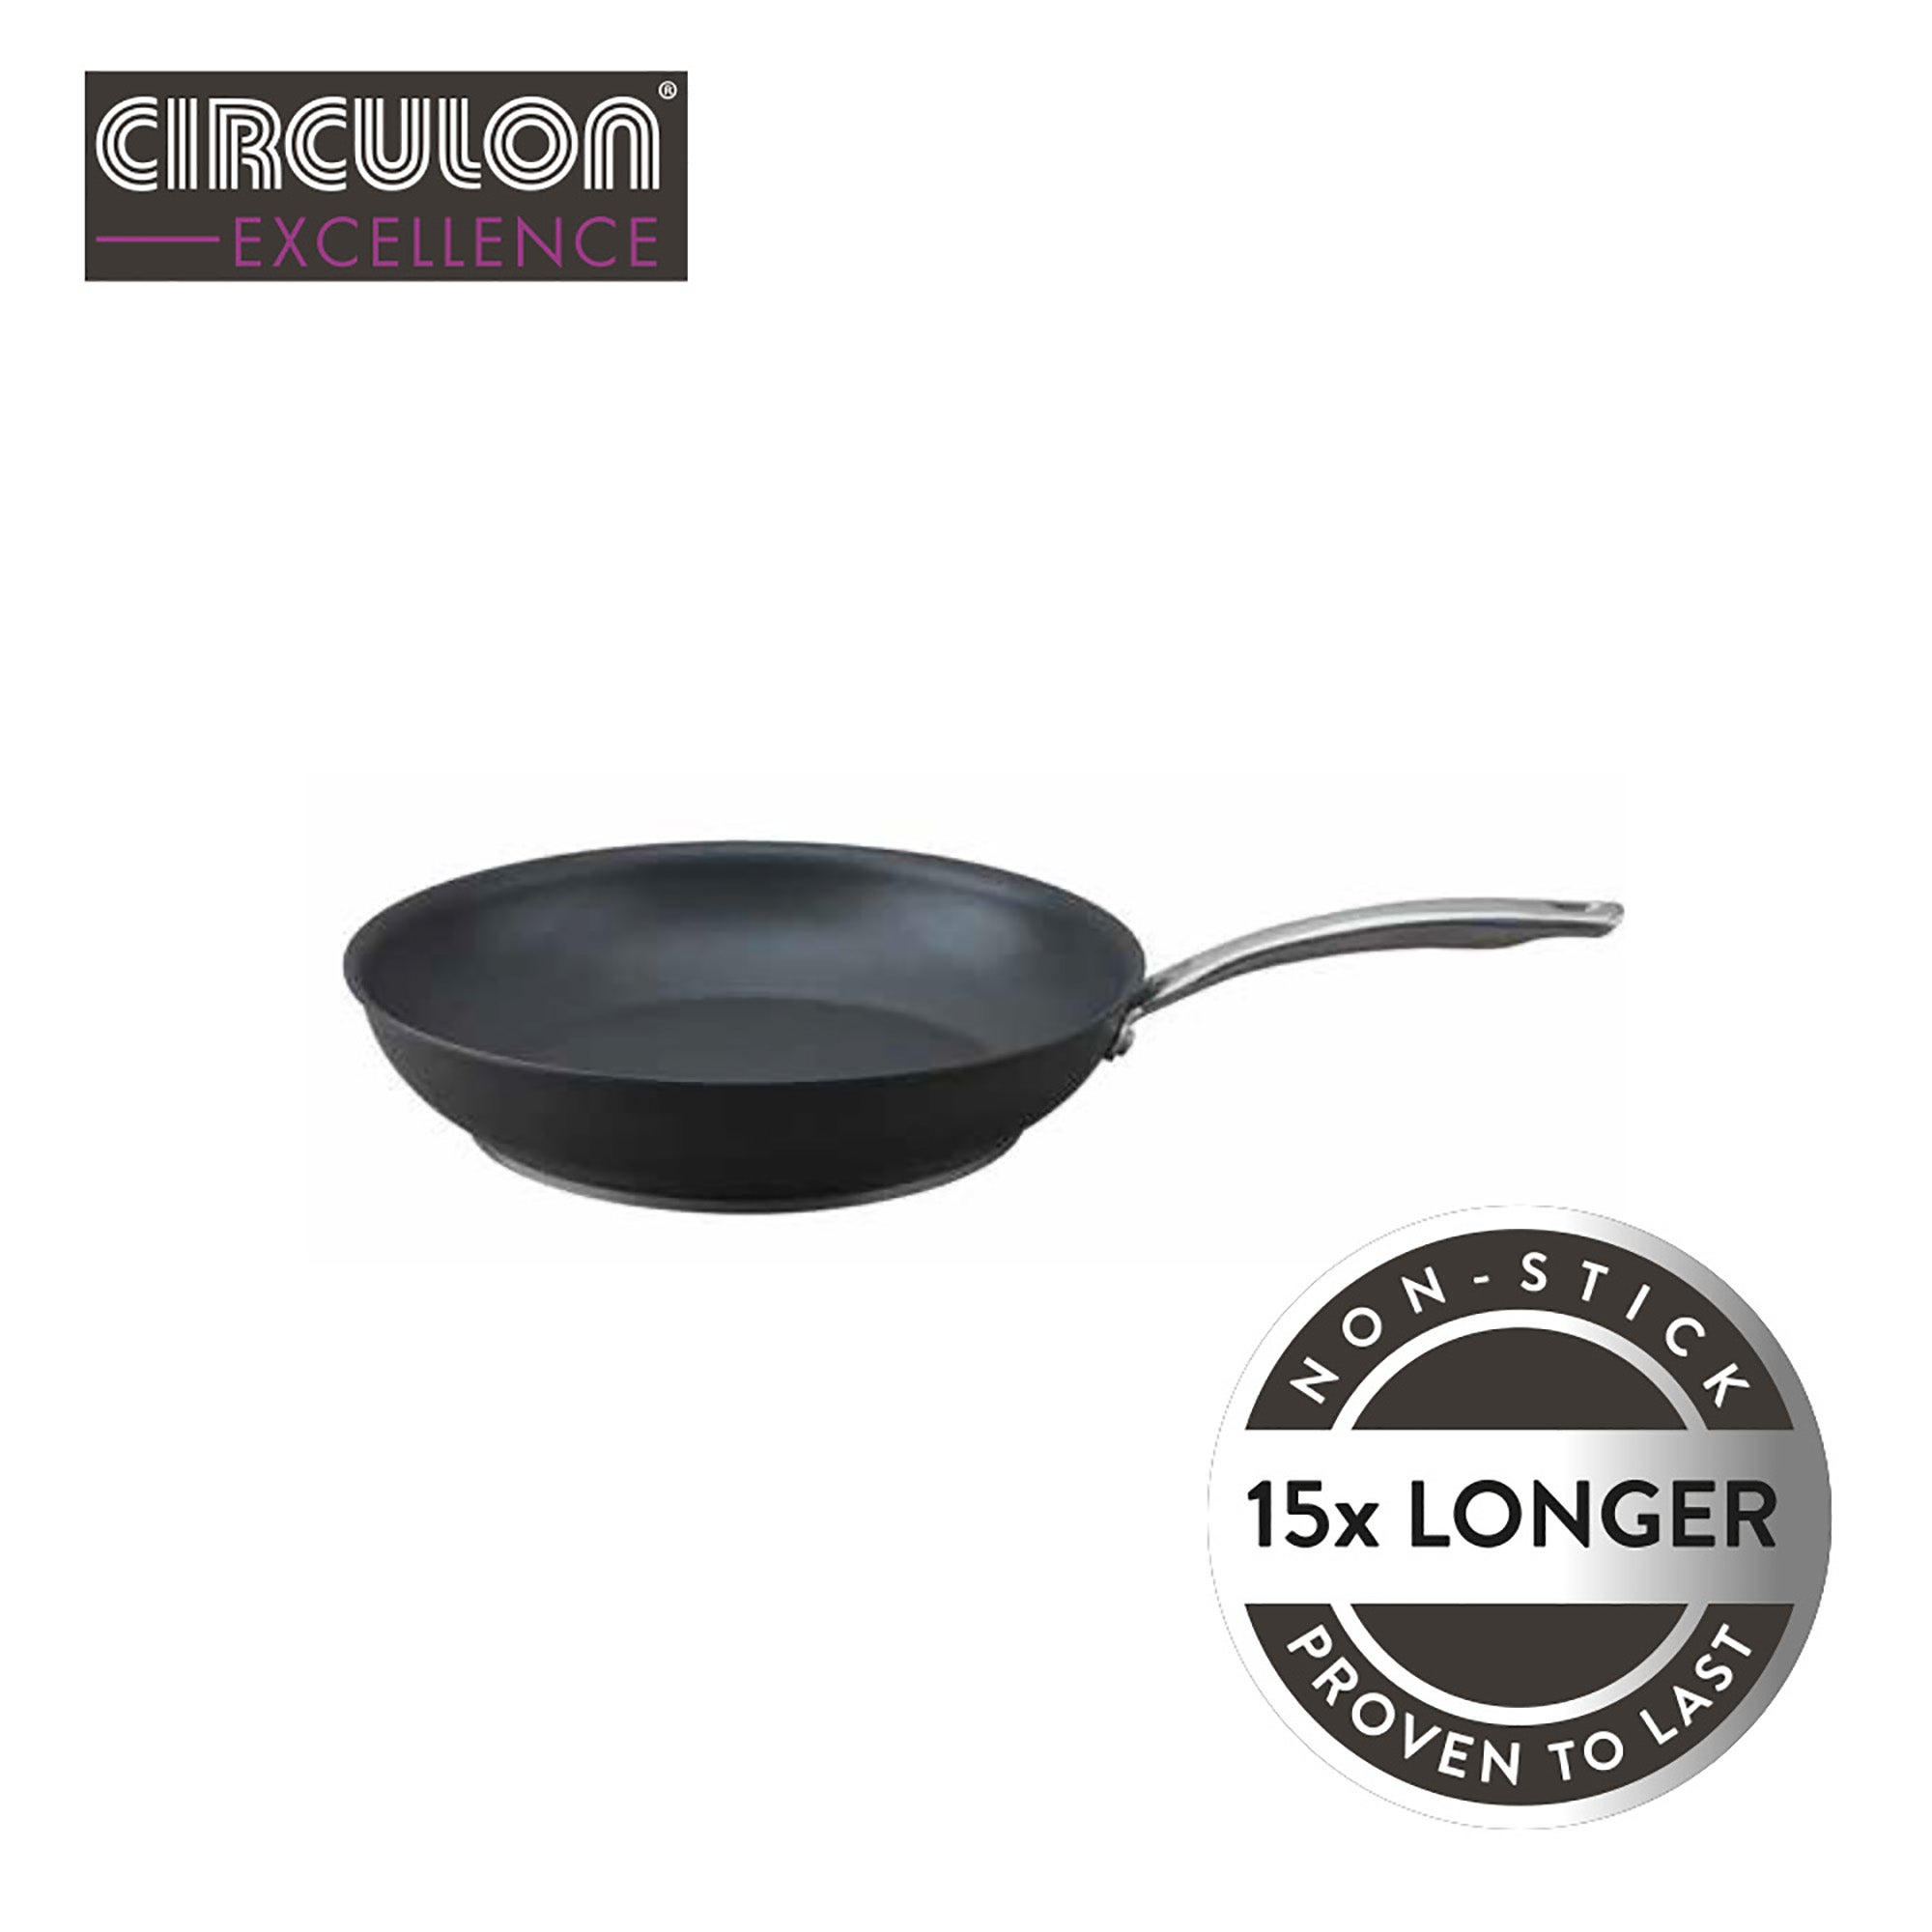 Circulon Excellence Hard Anodised Non-Stick Induction 30cm Frying Pan Black